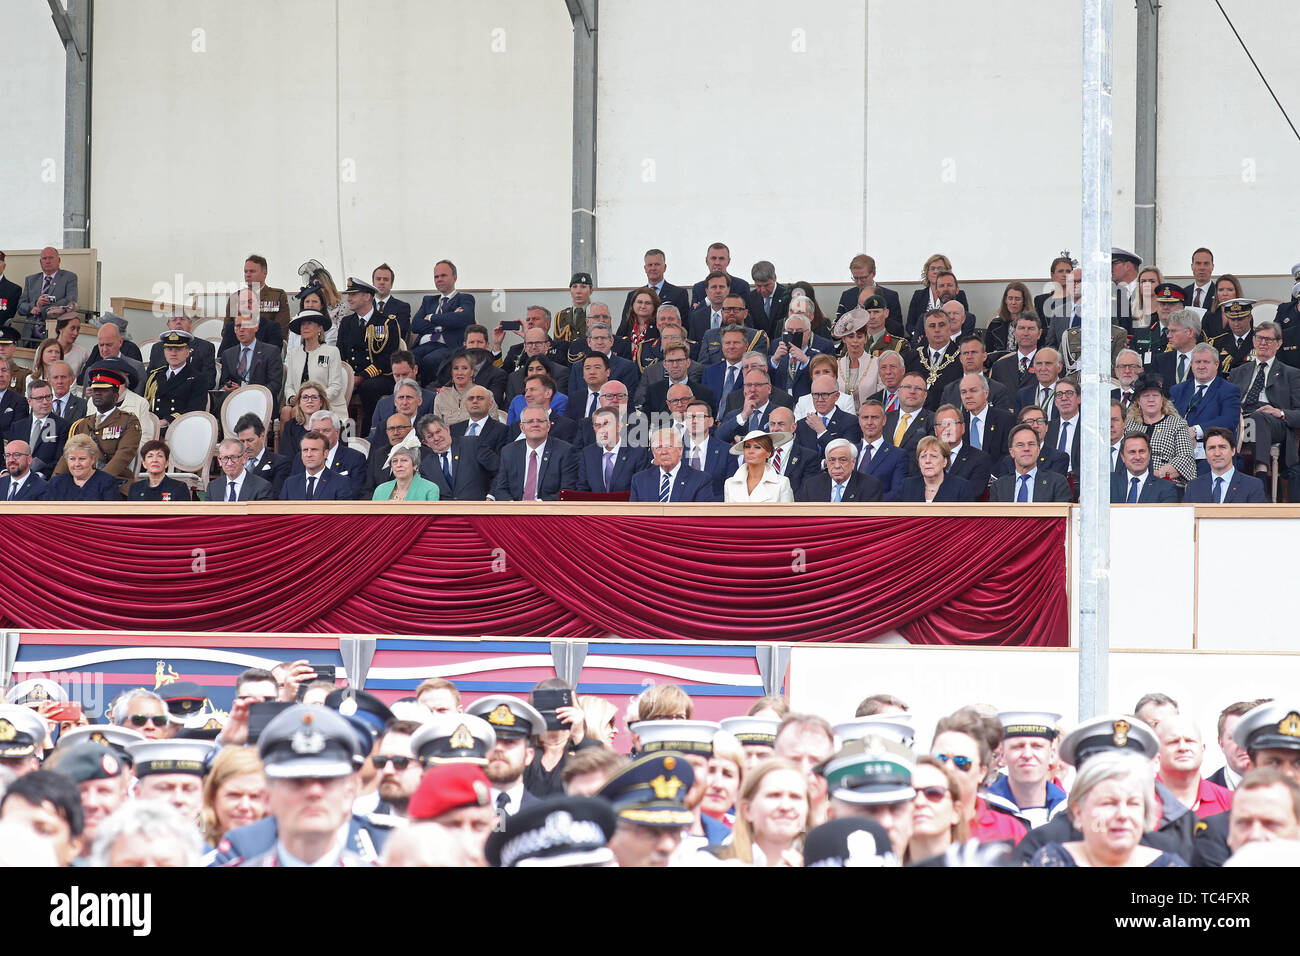 (front row, left to right) Prime Minister of Belgium Charles Michel, Prime Minister of of Norway Erna Solberg, Governor-General of New Zealand Patsy Reddy, Philip May, President of the France Emmanuel Macron, Prime Minister Theresa May, US President Donald Trump, Melania Trump, President of Greece Prokopis Pavlopoulos, German Chancellor Angela Merkel, Prime Minister of the Netherlands Mark Rutte, Prime Minister of Luxembourg Xavier Bettel, and Prime Minister of Canada Justin Trudeau, during commemorations for the 75th Anniversary of the D-Day landings at Southsea Common, Portsmouth. Stock Photo